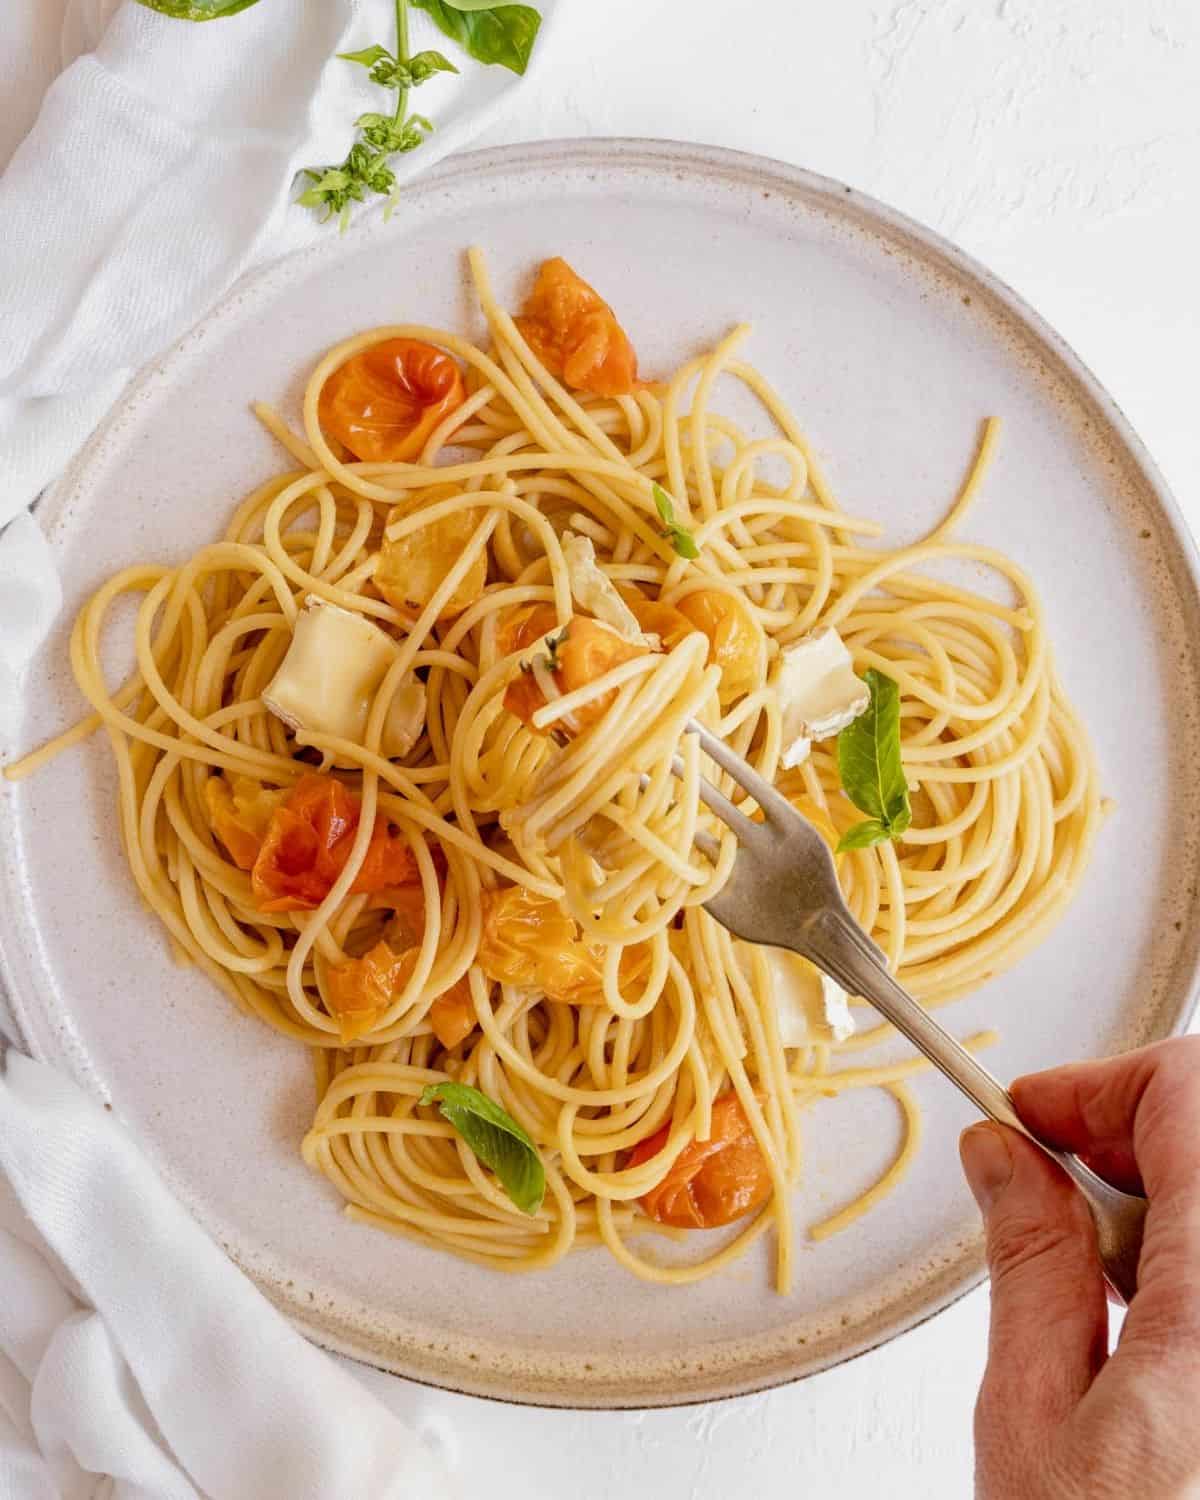 Cherry tomatoes pasta with Brie cheese on a fork